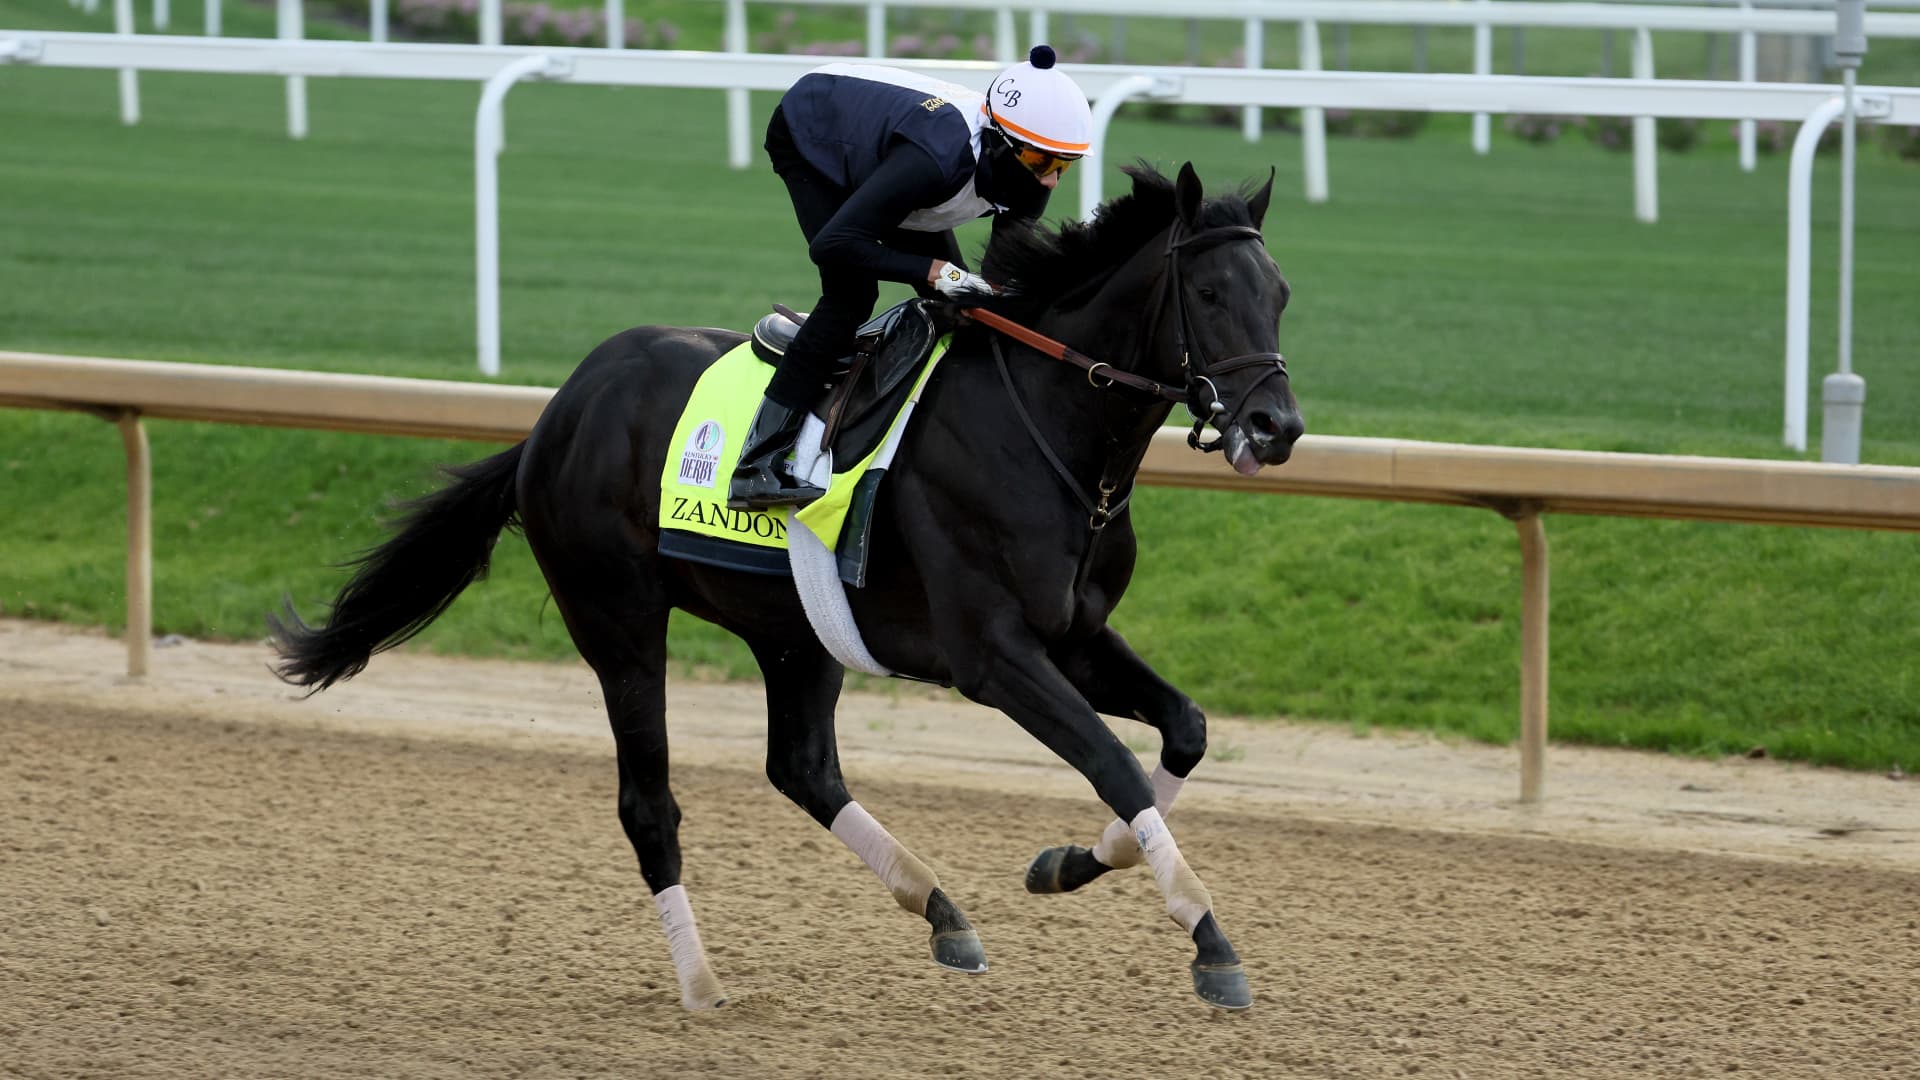 Zandon during the morning training for the Kentucky Derby at Churchill Downs on May 04, 2022 in Louisville, Kentucky.